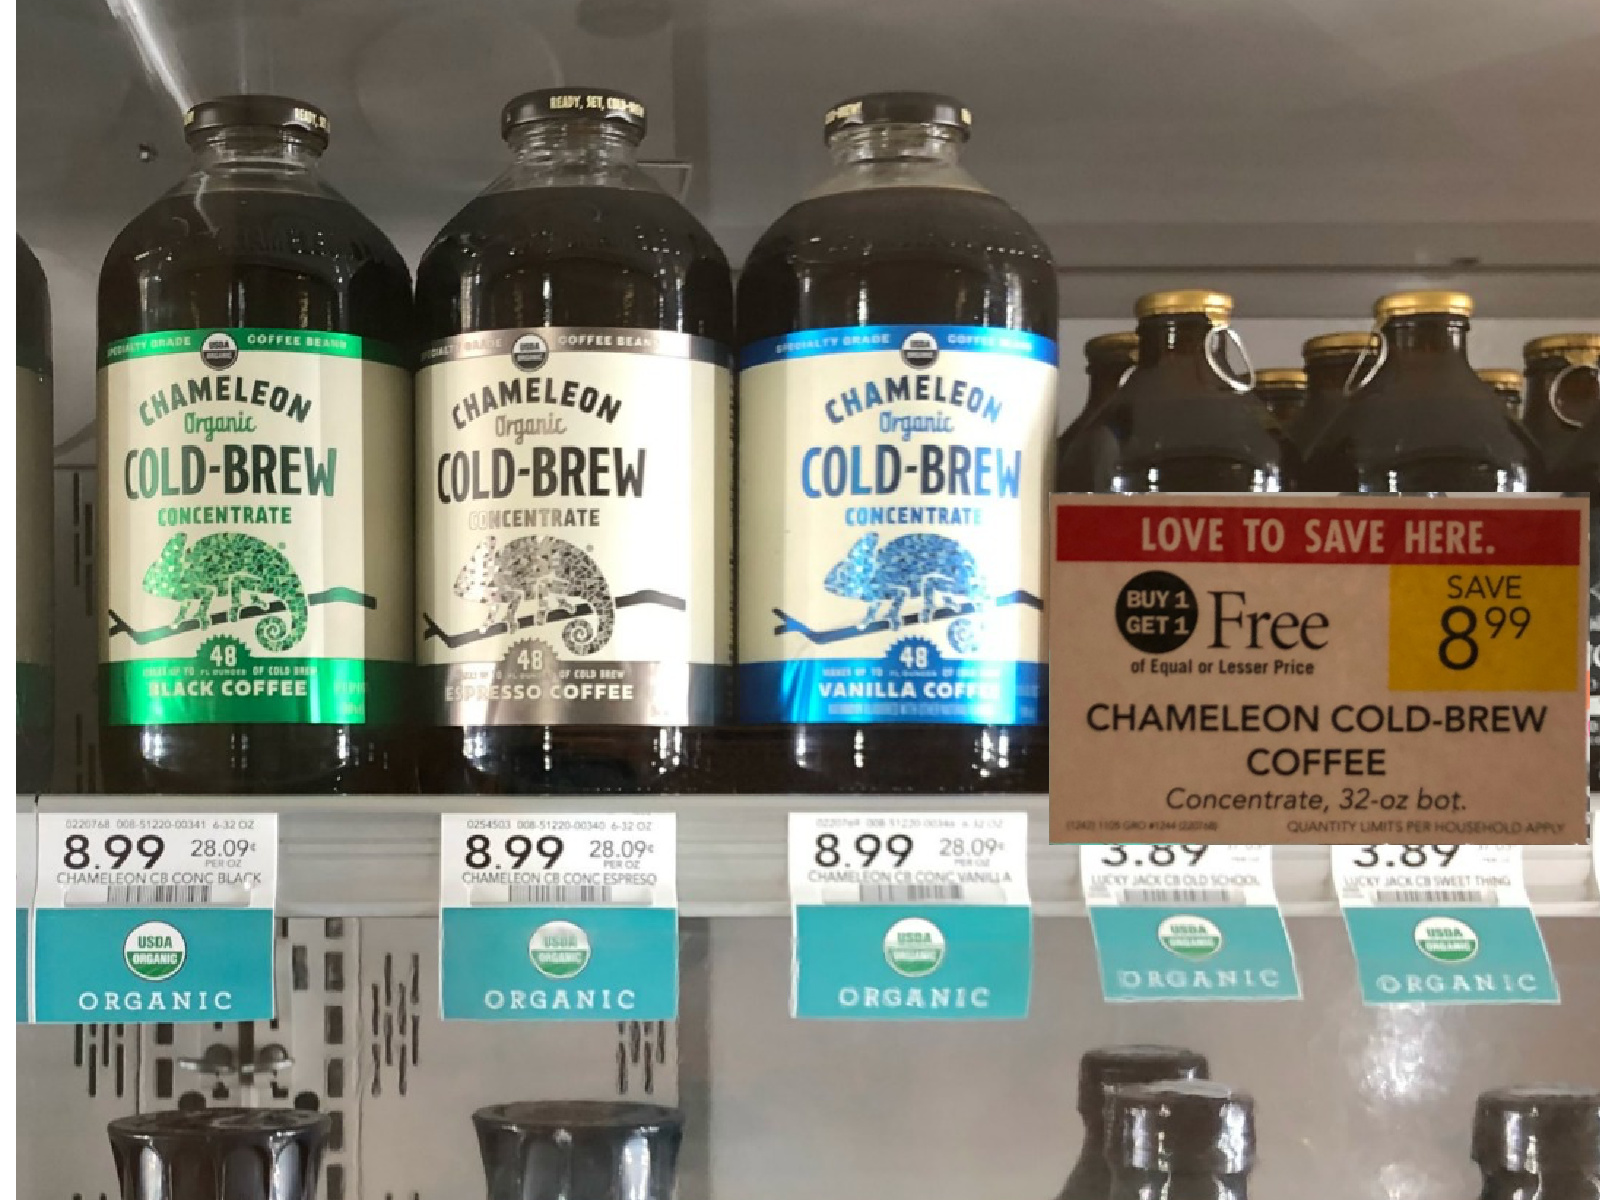 Get Ready For An Upcoming Sale On Chameleon Cold-Brew At Publix on I Heart Publix